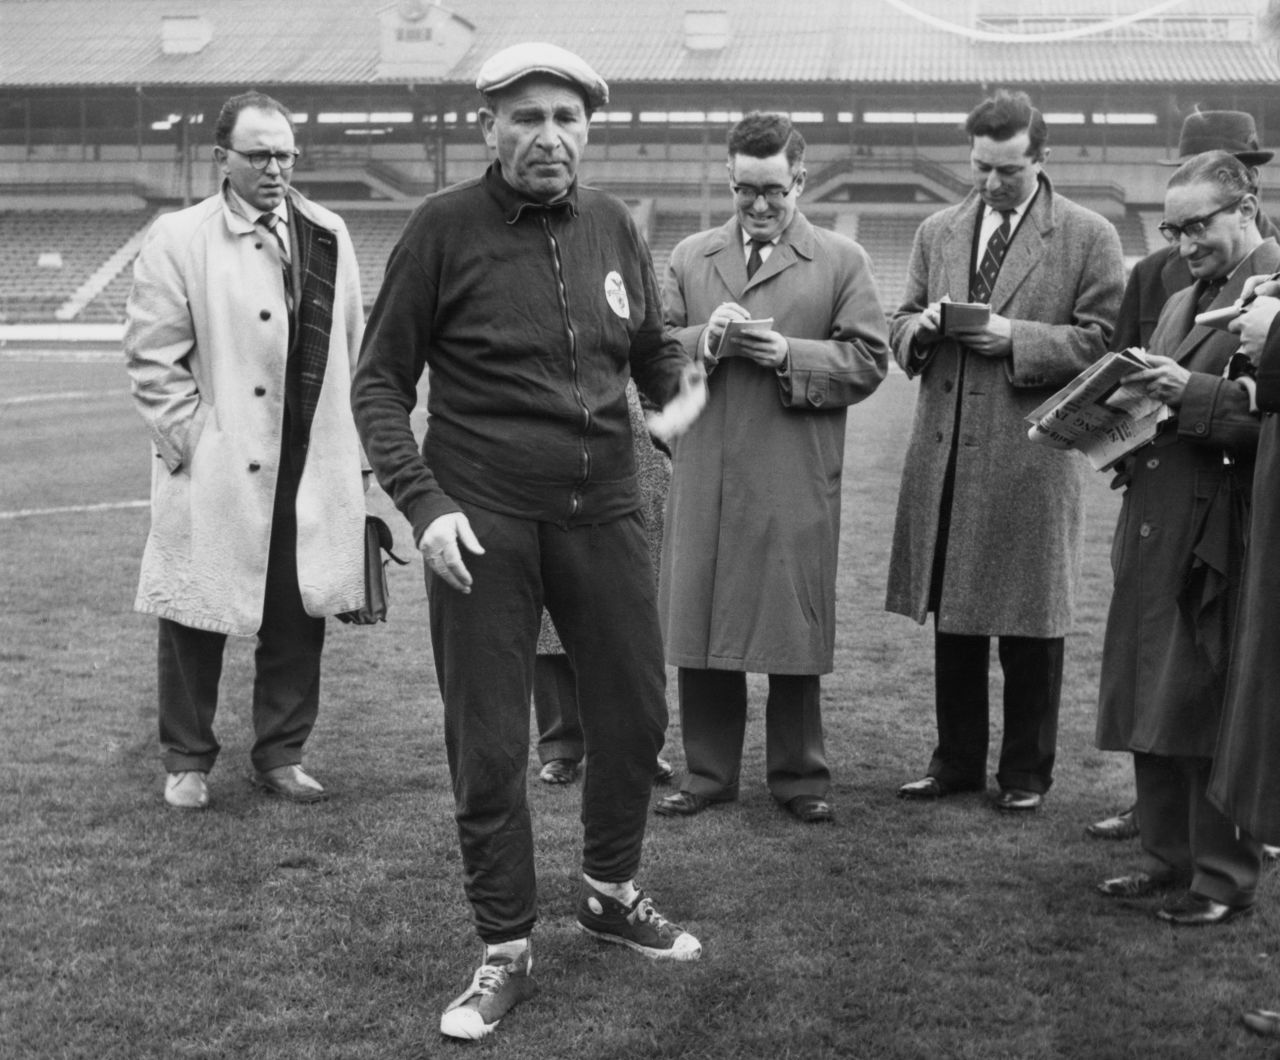 Bela Guttmann was a Hungarian Jew who transformed the face of modern football. He worked across the world, enjoying huge success in Brazil and Portugal, where he won the European Cup on two occasions with Benfica.